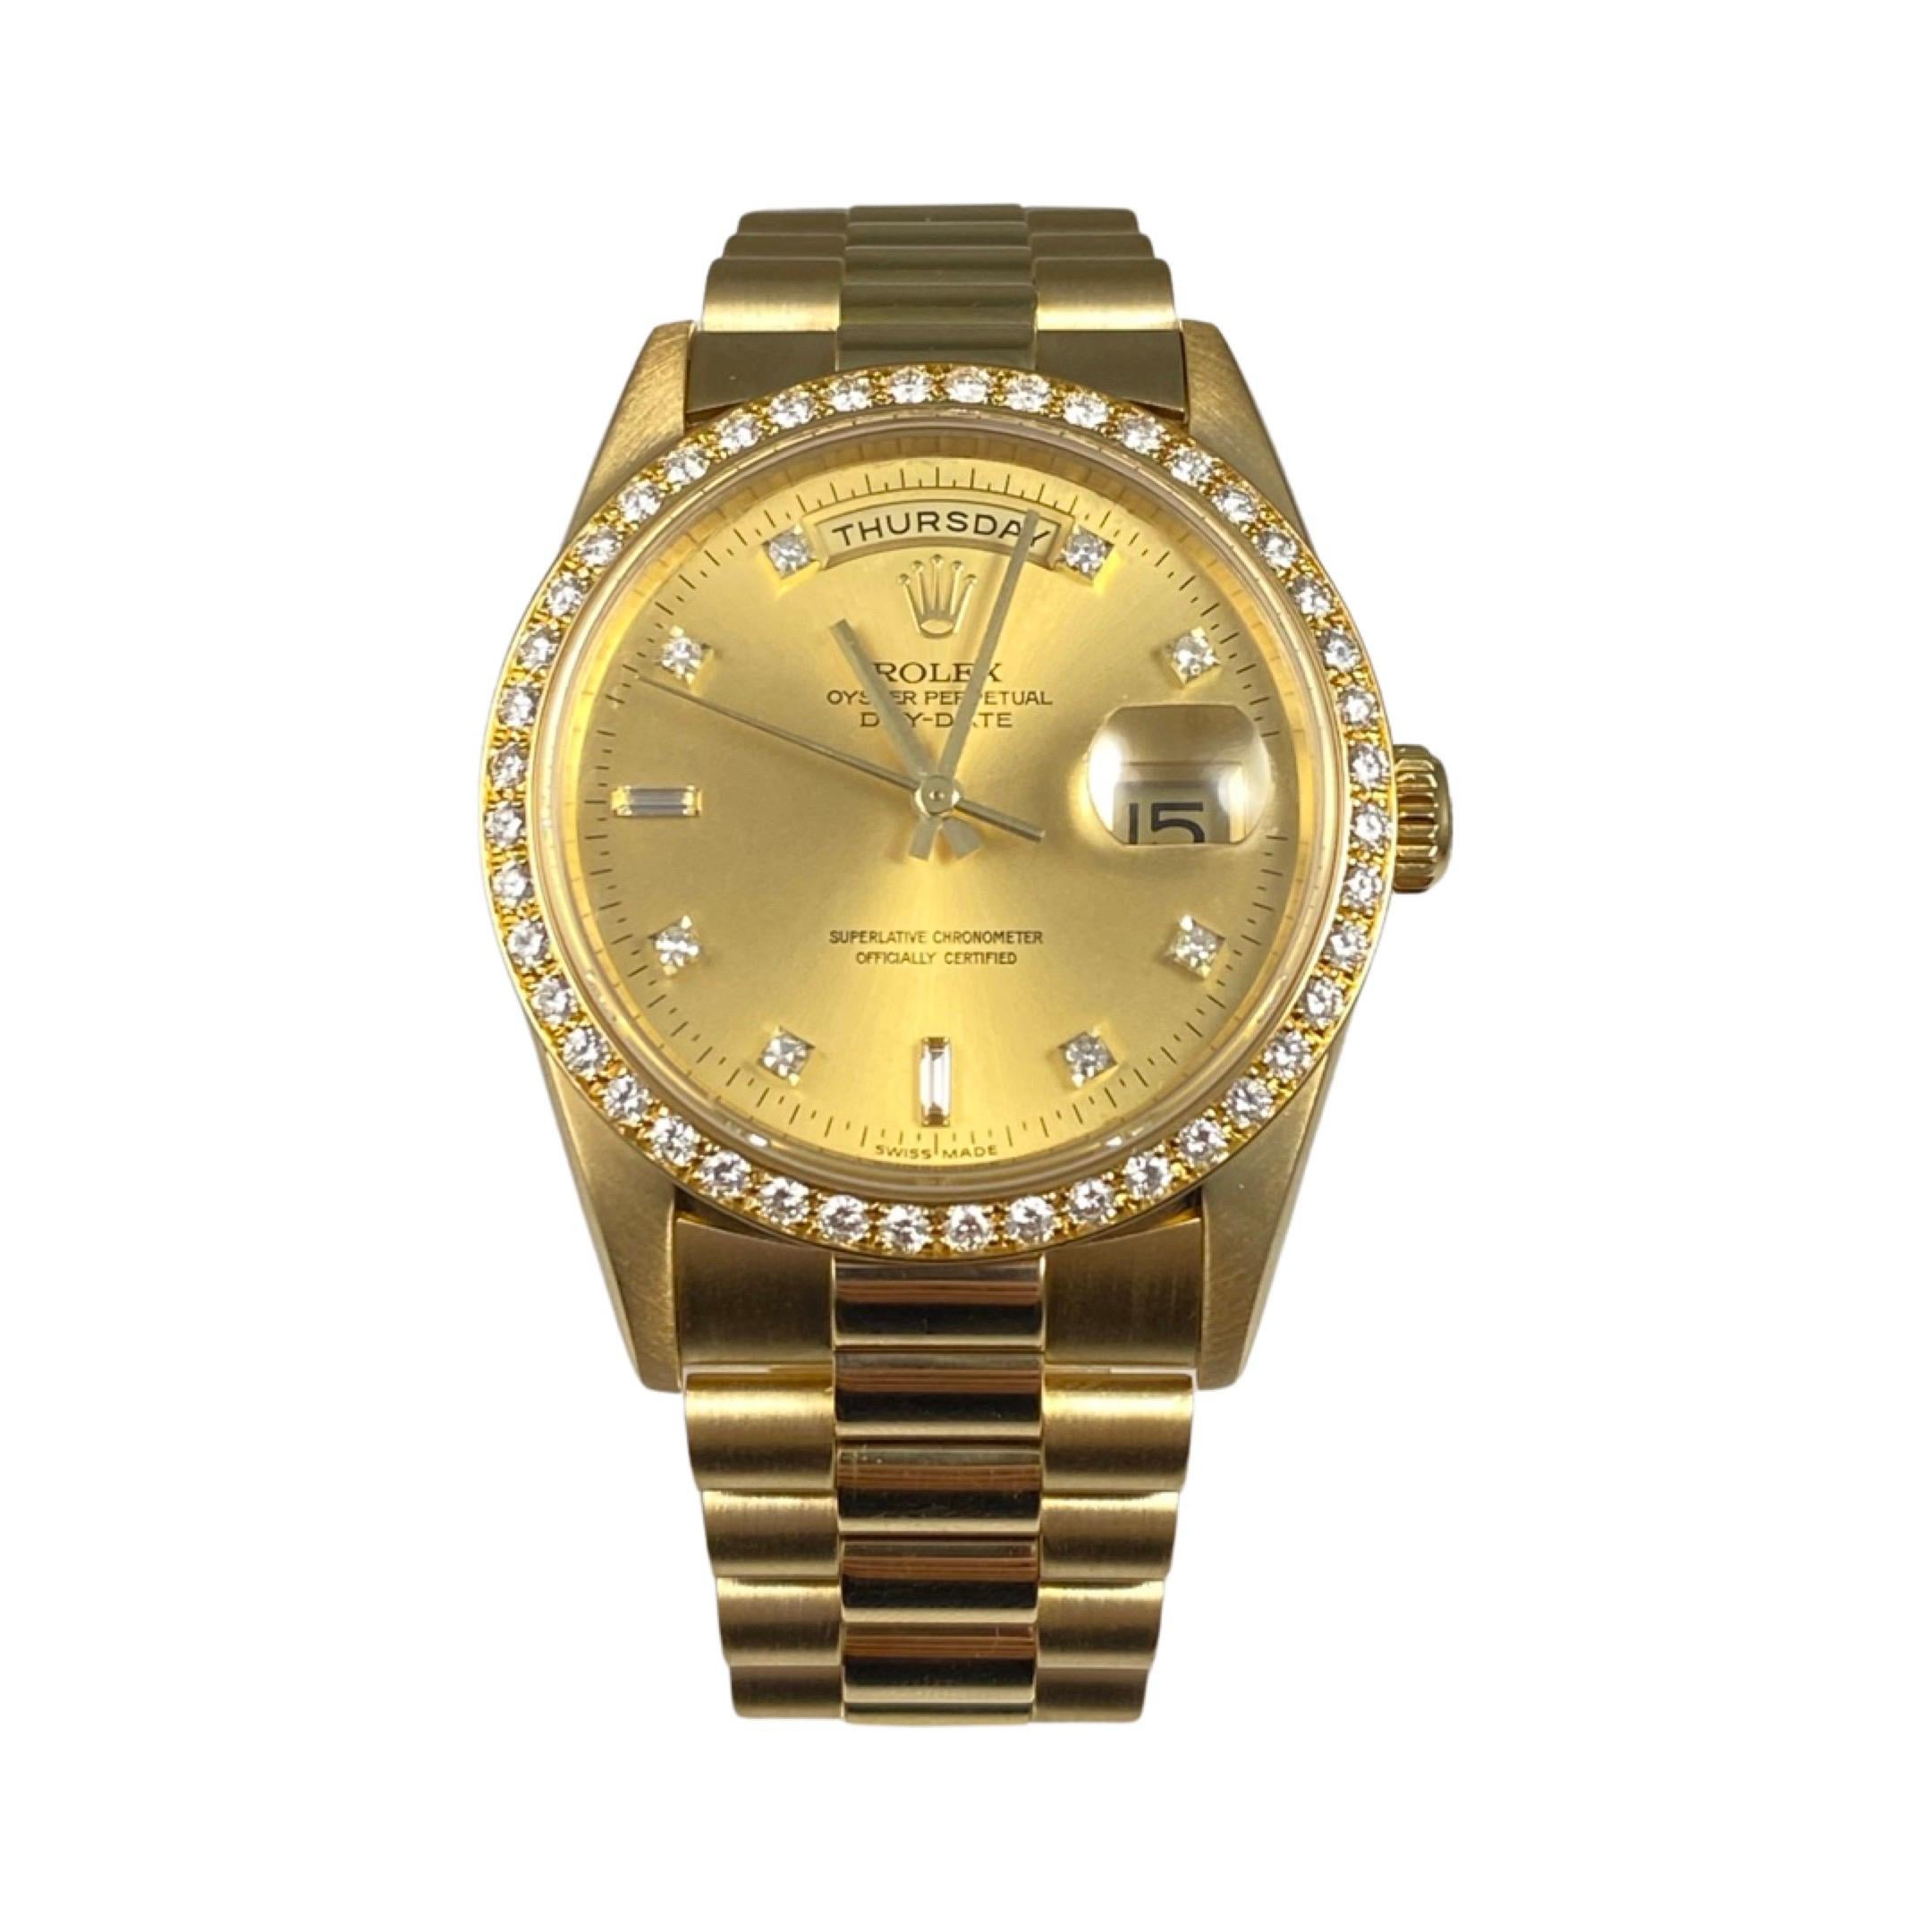 Brand: Rolex

Model Name: Day-Date

Model Number: 18348

Movement: Automatic

Case Size: 36 mm

Case Back: Closed

Case Material: 18k Yellow Gold

Bezel: Diamond (Factory)

Dial: Gold 

Bracelet: 18k Yellow Gold

Hour Markers: Diamonds